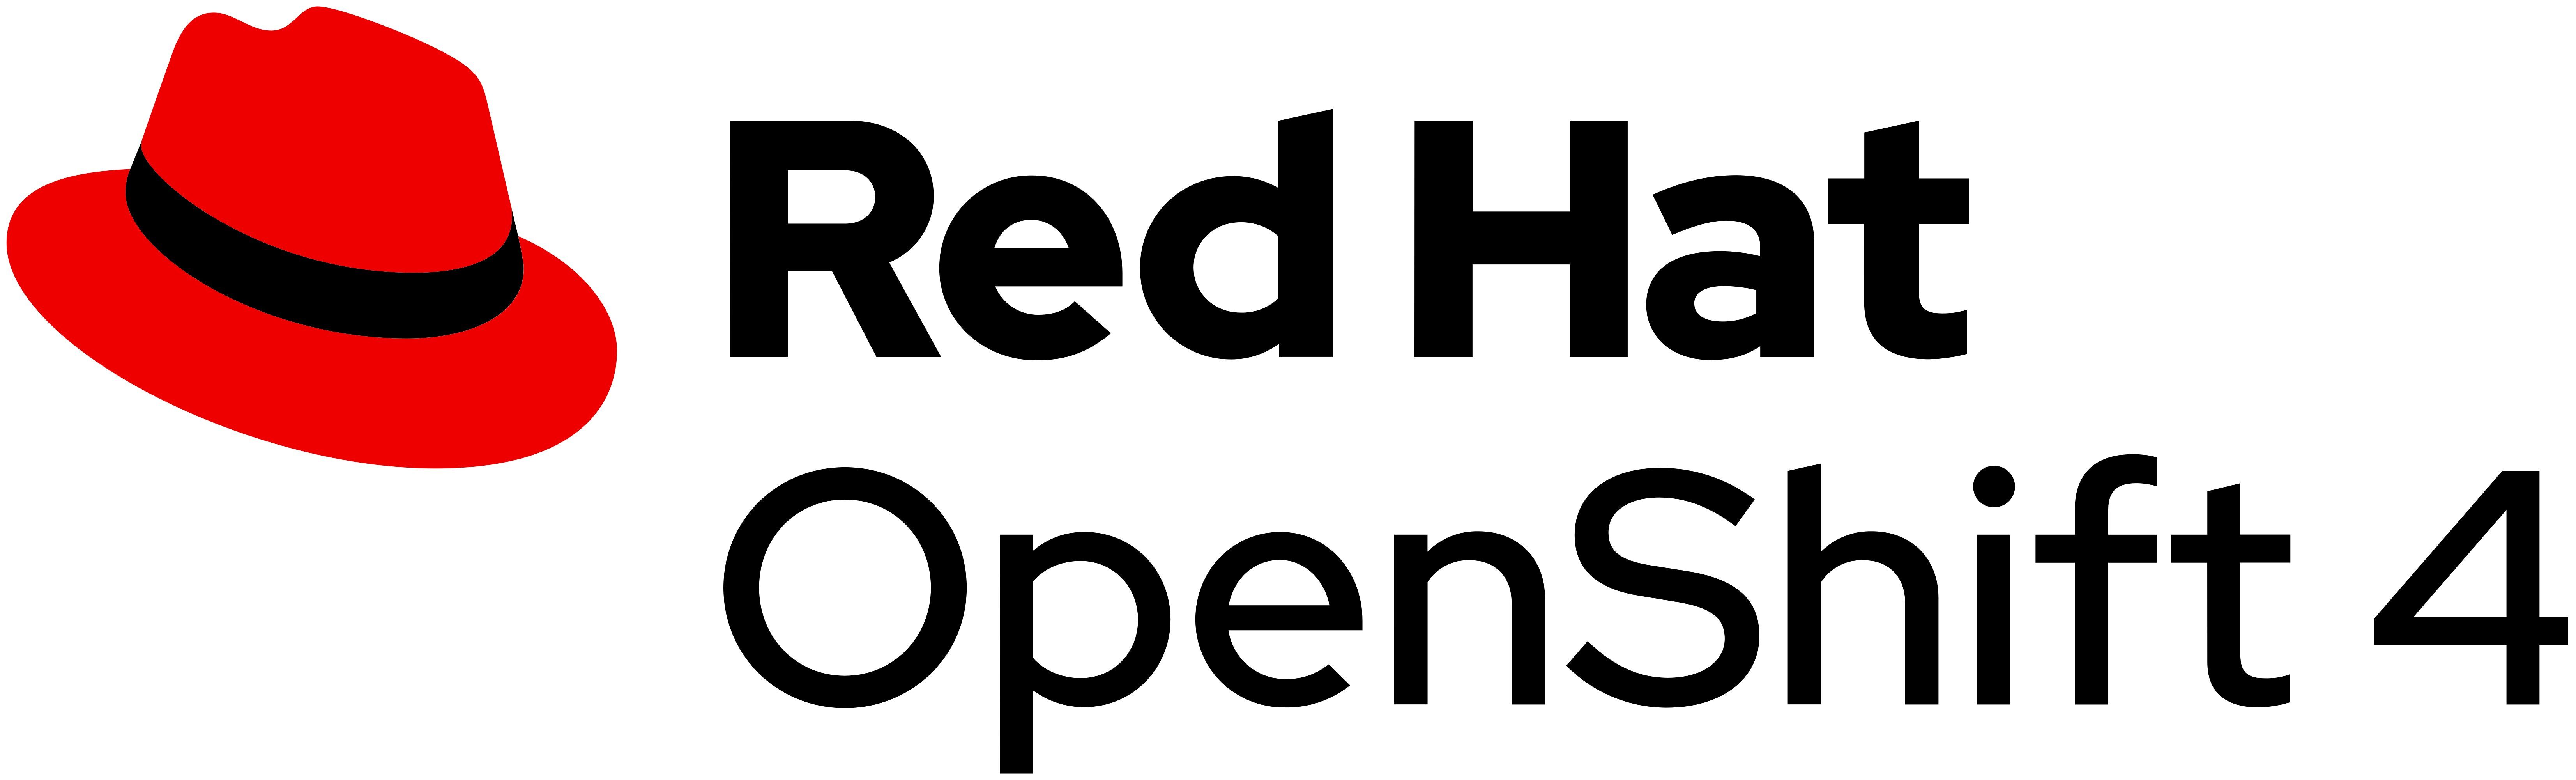 Red Hat OpenShift